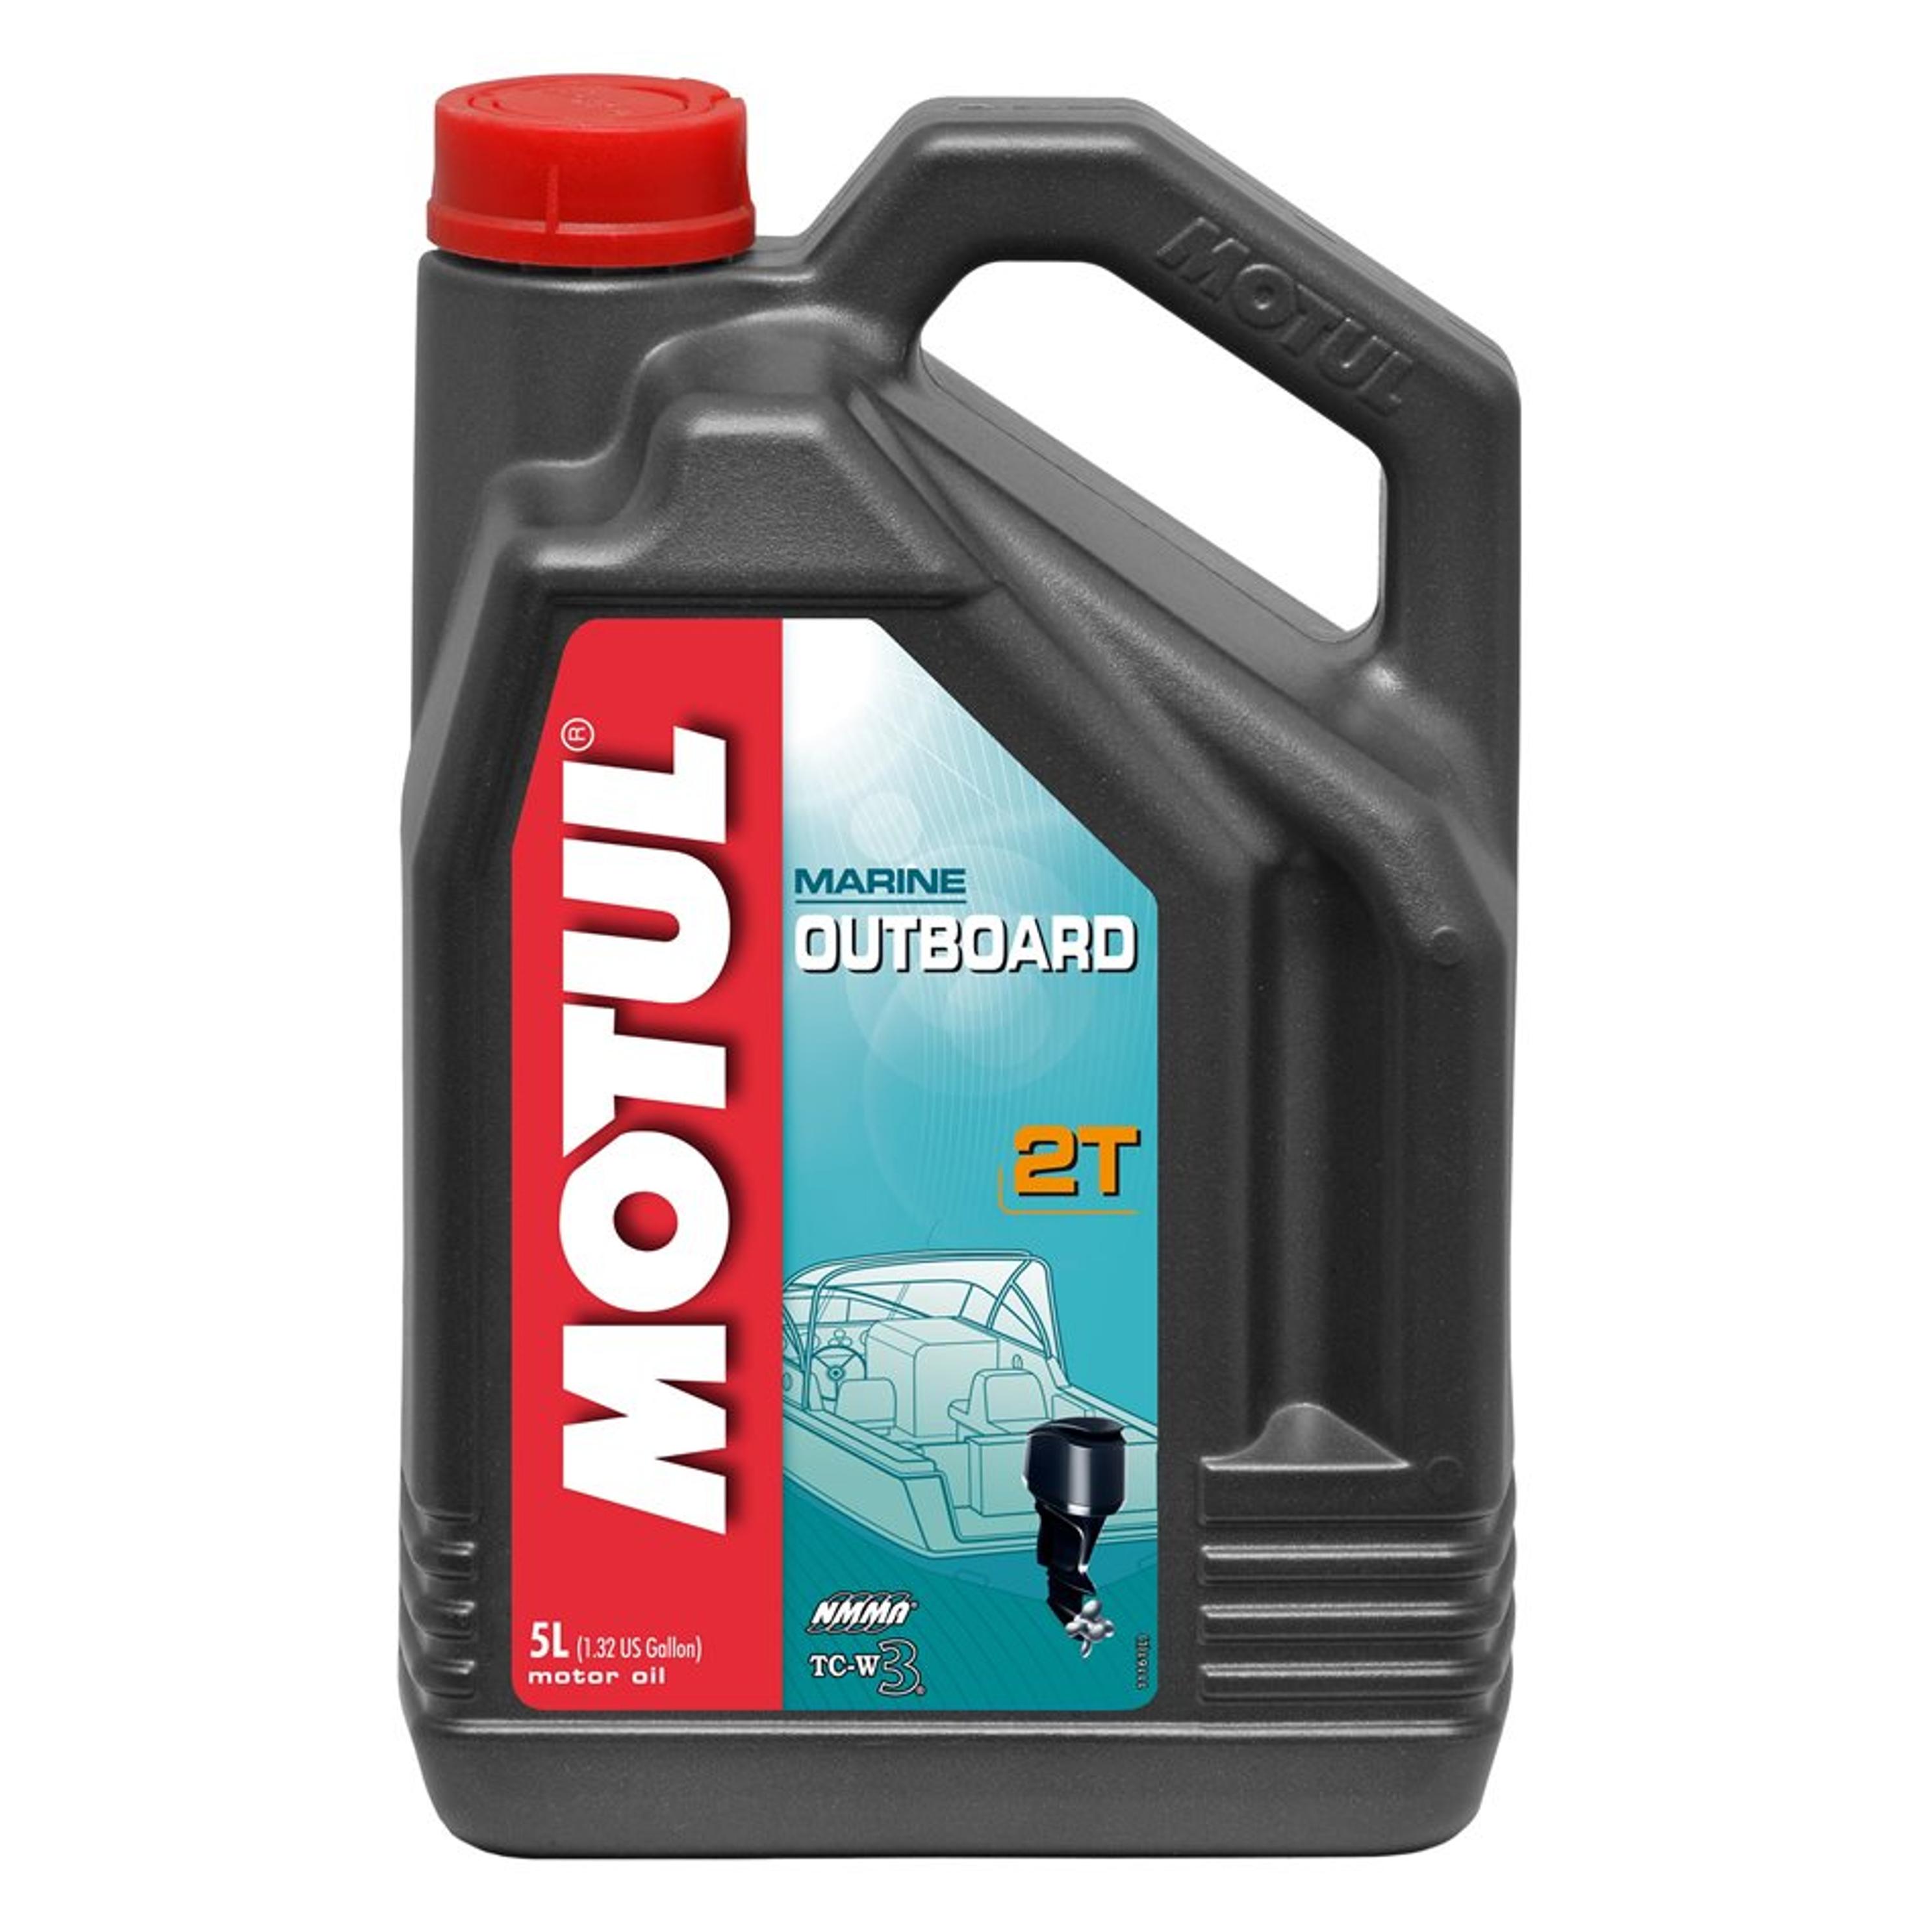 Масло моторное Motul Outboard 2T